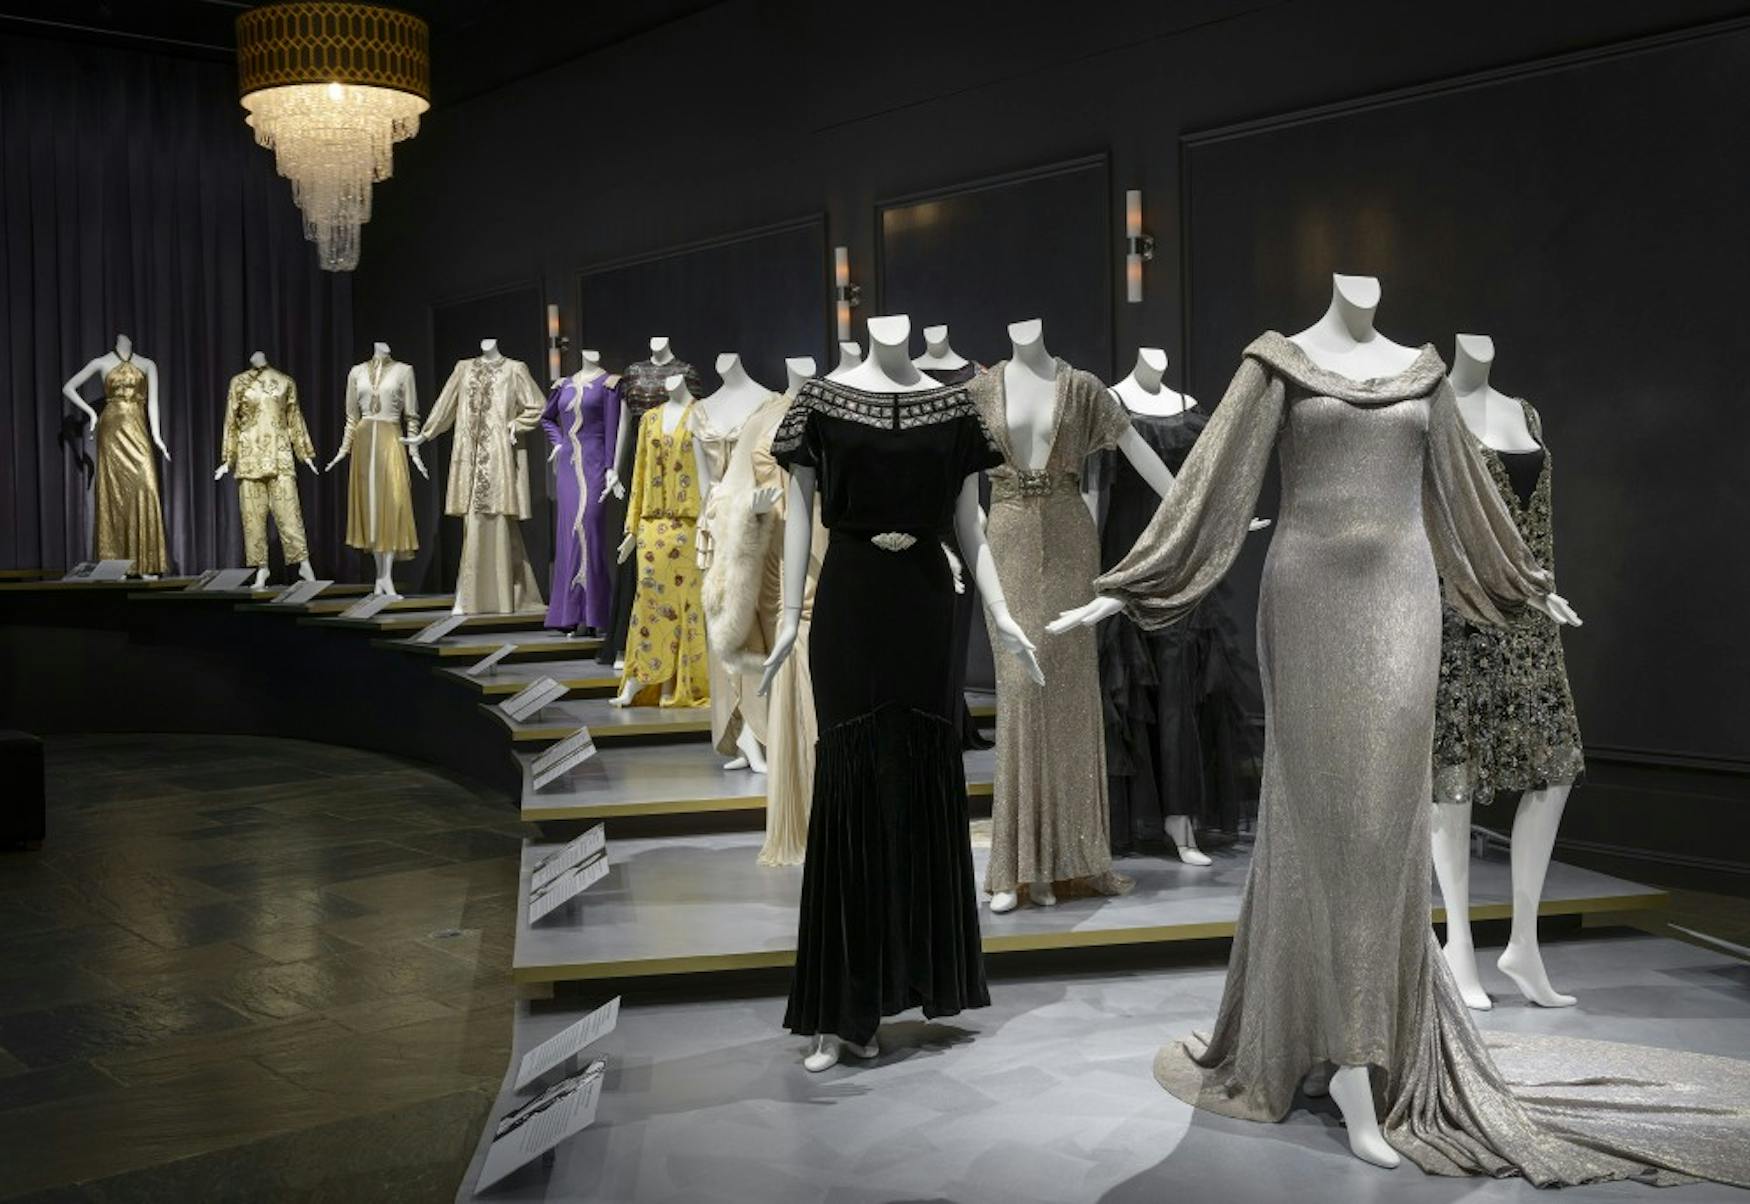 1.	Hollywood Glamour: Fashion and Jewelry from the Silver Screen, at the Museum of Fine Arts, Boston,		September 8, 2014	Rosemary Merrill Loring and Caleb Loring, Jr. Gallery of Textiles	*Sponsored by Neil Lane Jewelry. Additional support from the David and Roberta Logie Fund for Textile and Fashion Arts 	and the Loring Textile Gallery Exhibition Fund 	*Photograph © Museum of Fine Arts, Boston